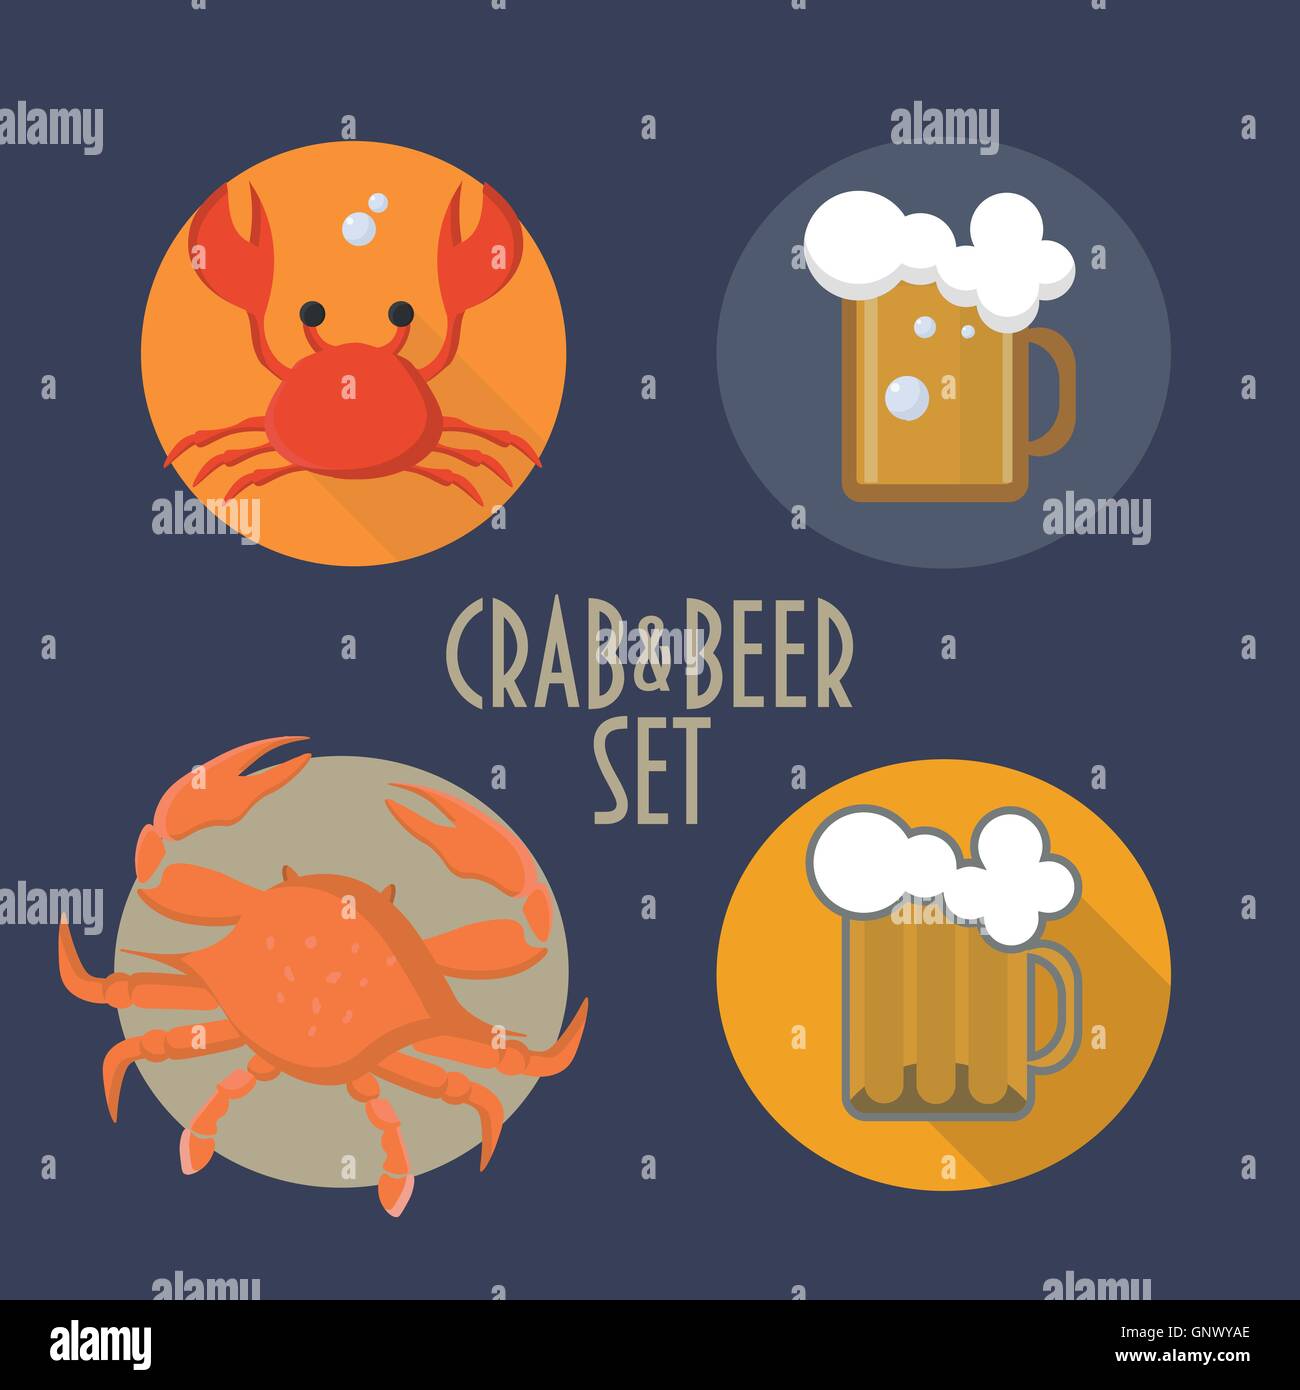 Crab and beer icons set. Crab and beer festival. Crab icon. Beer Mug icon. Stock Vector